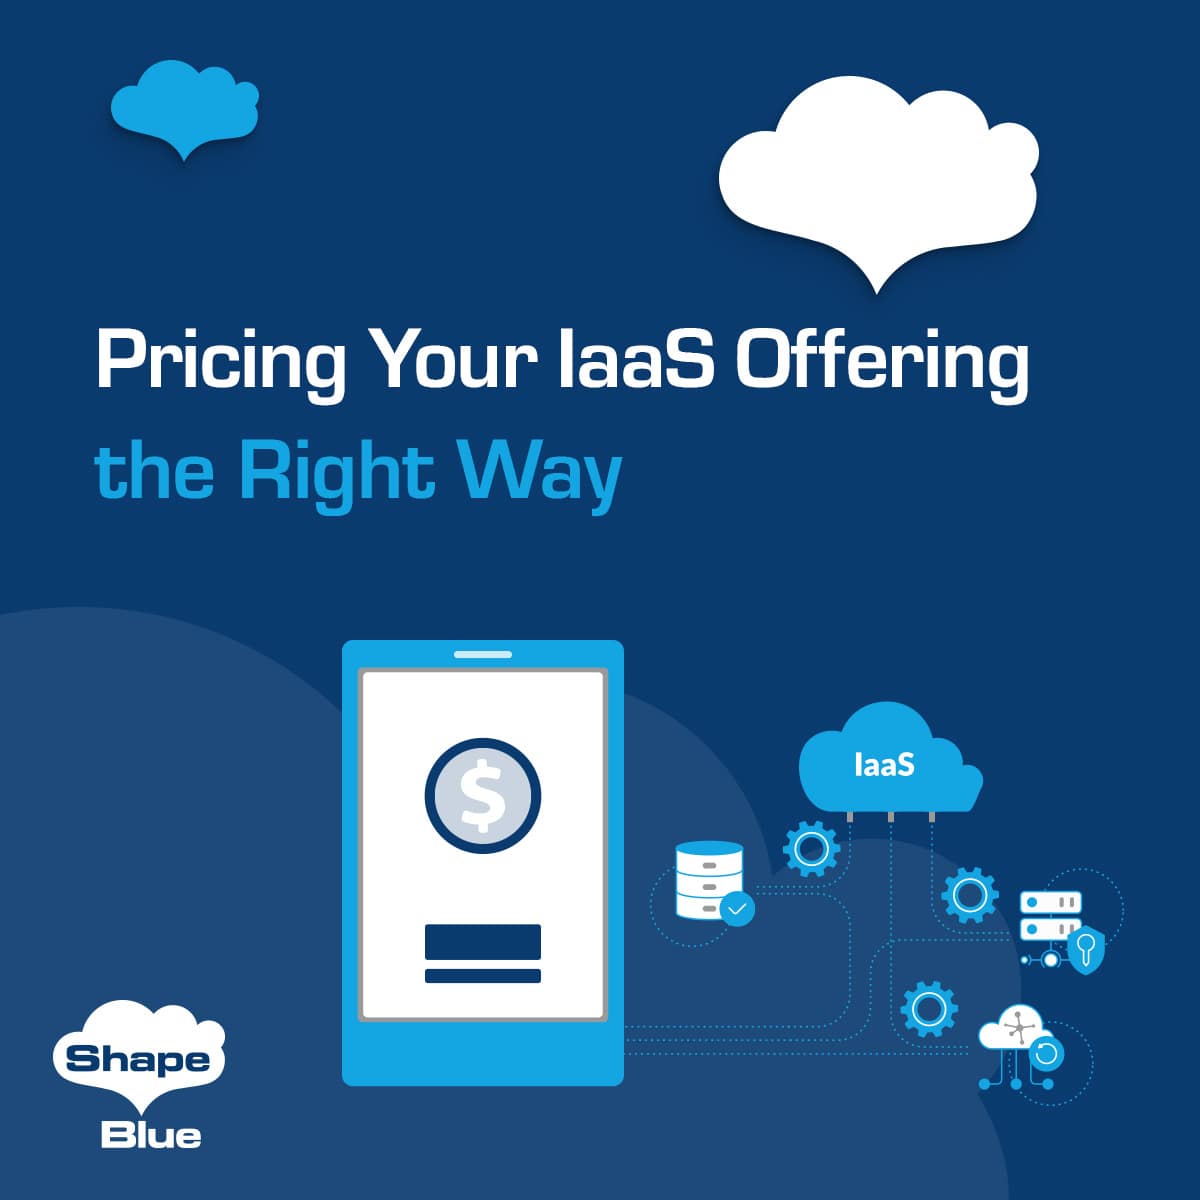 Pricing IaaS the Right Way